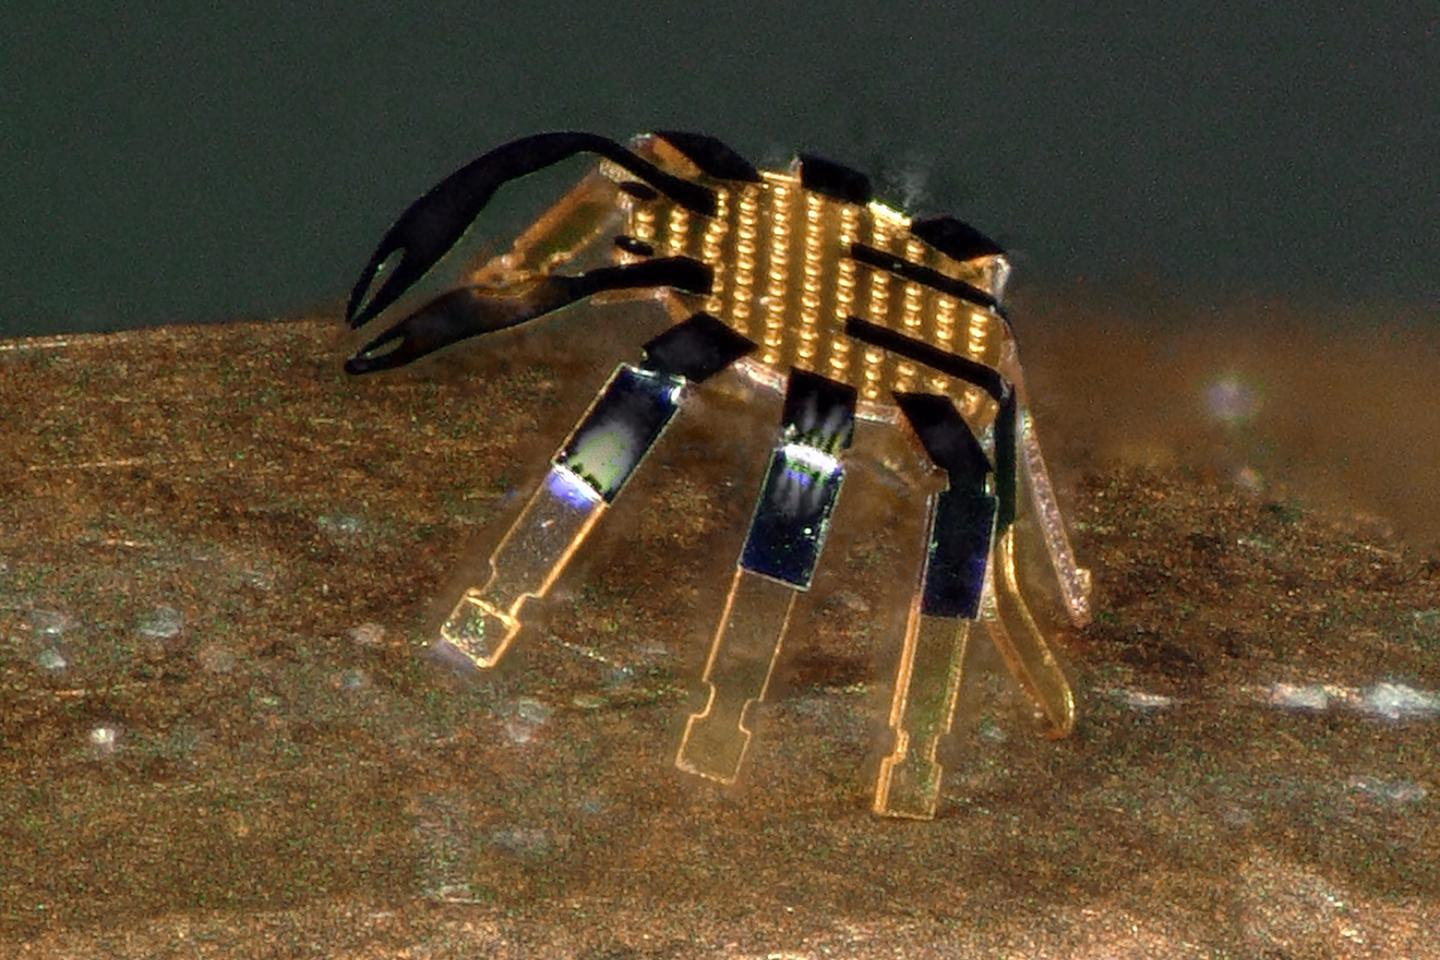 At just half a millimeter wide, these crabs can move at a rate of half their body length per second